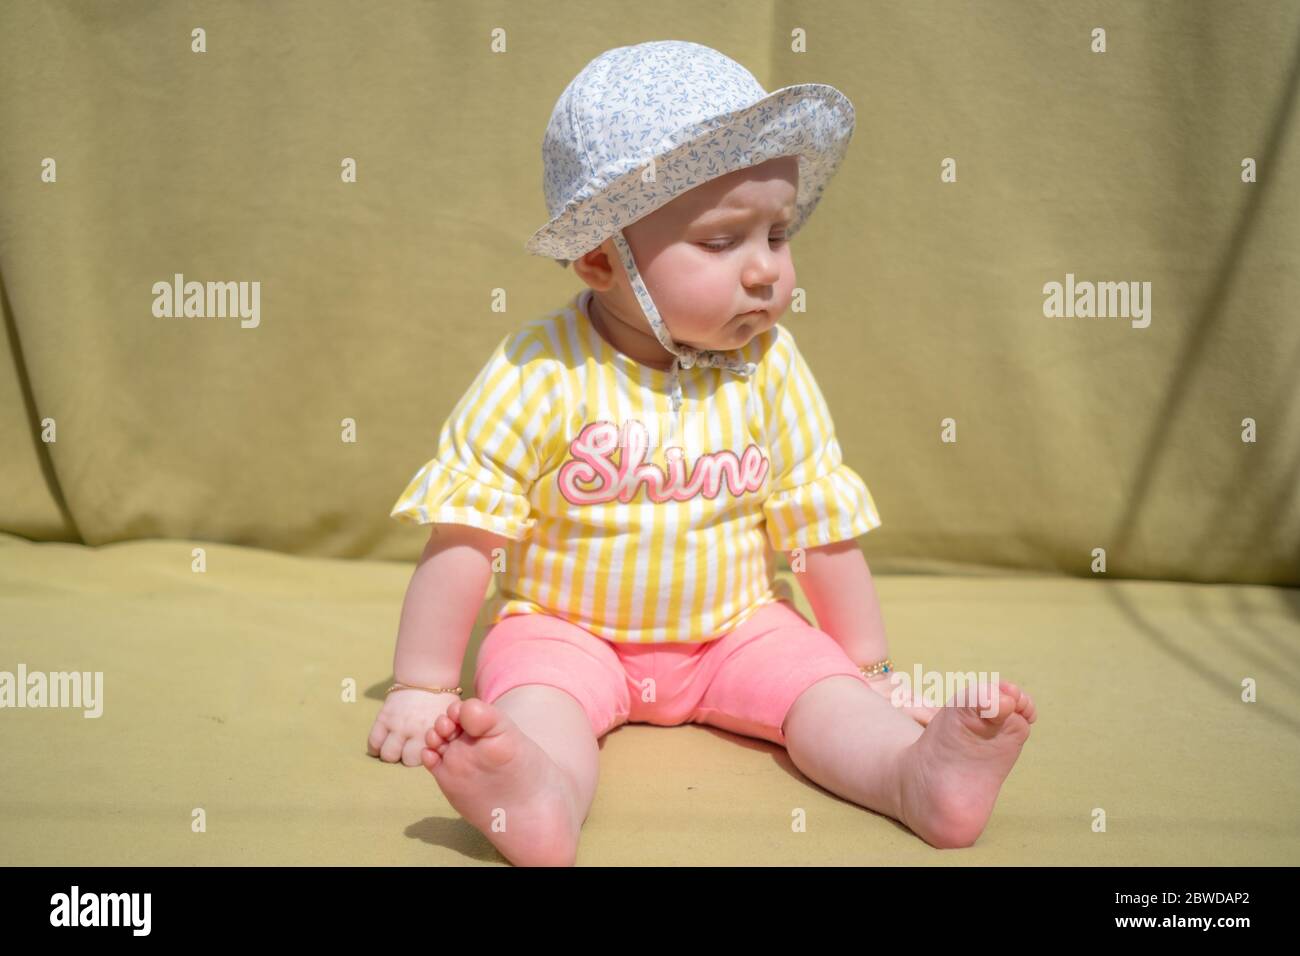 Cute baby girl wear adorable hat looking at camera make funny faces on green background Stock Photo